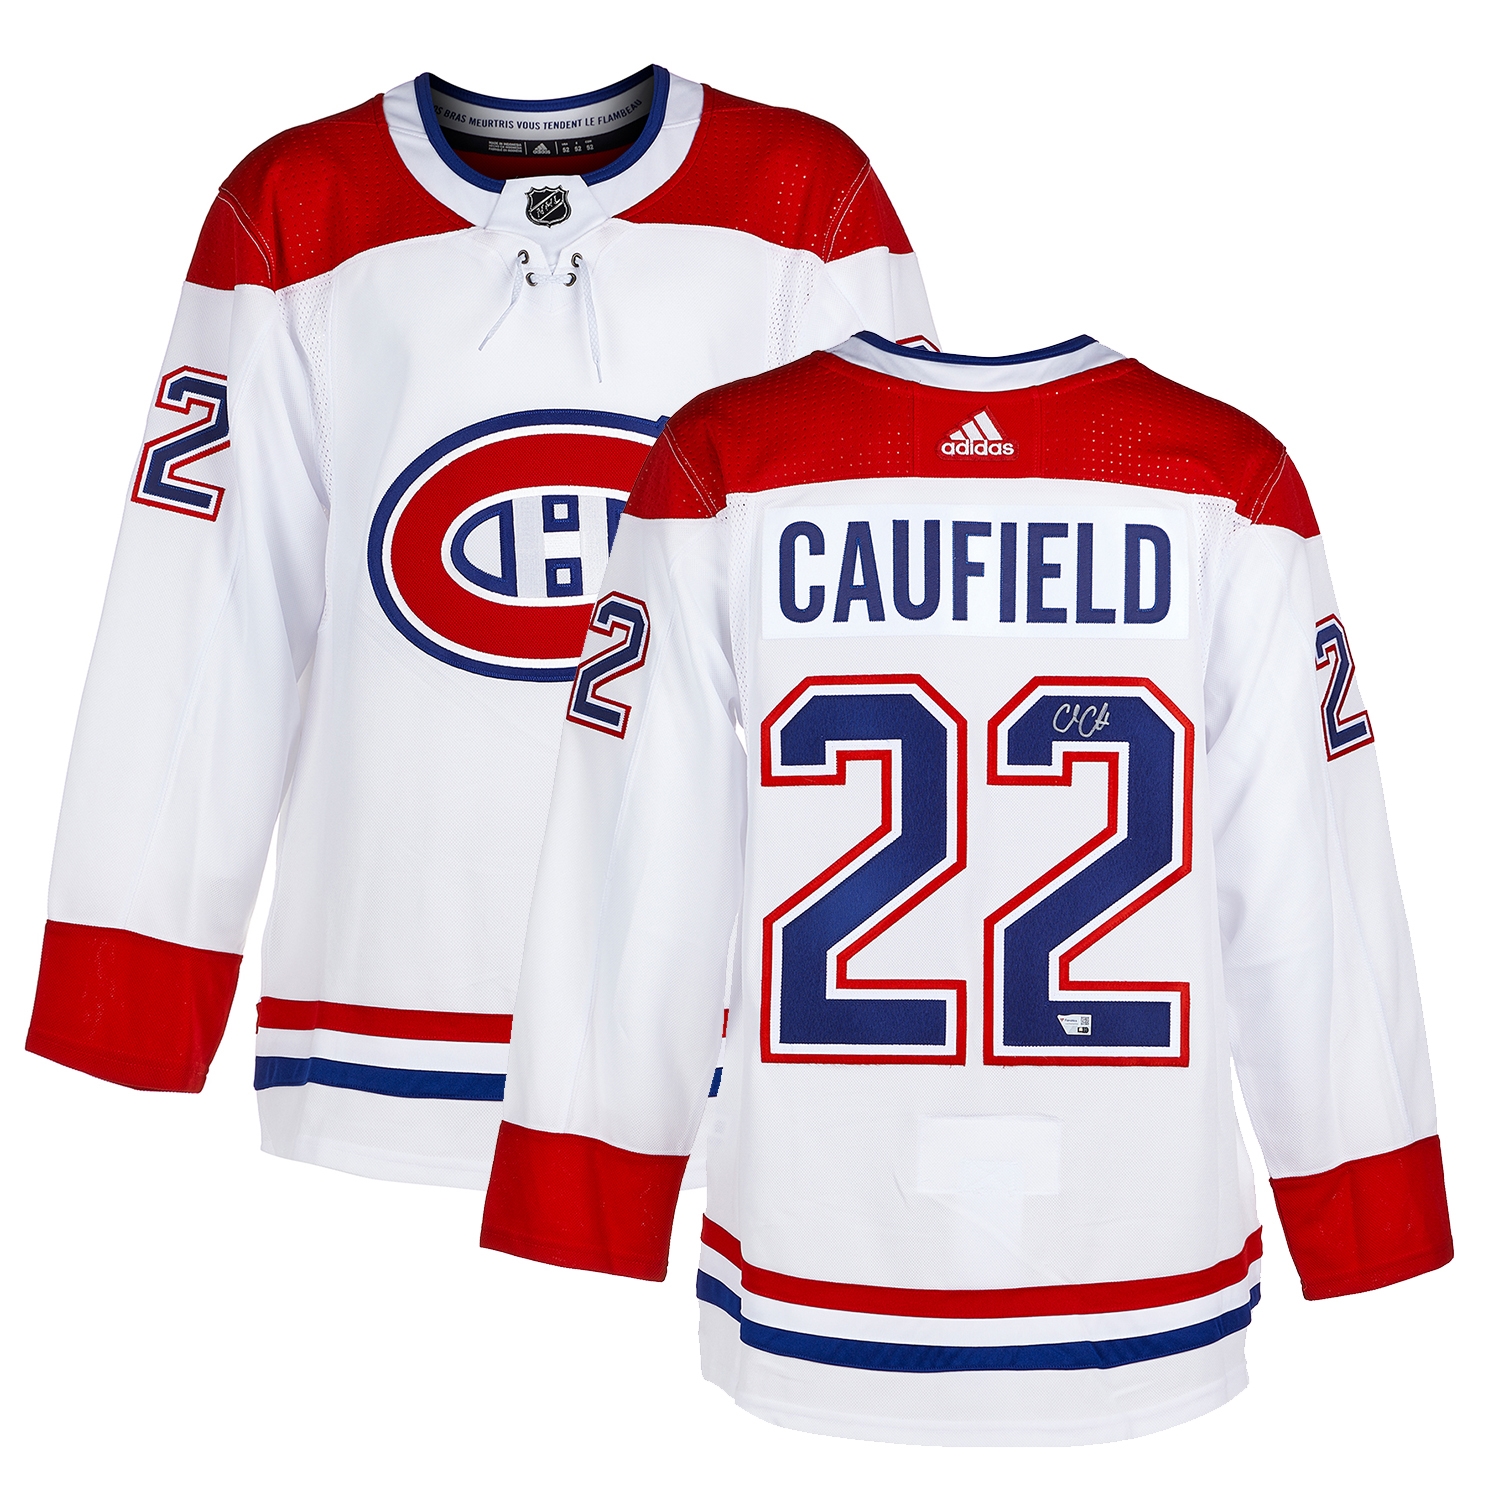 Cole Caufield Signed Montreal Canadiens White adidas Jersey